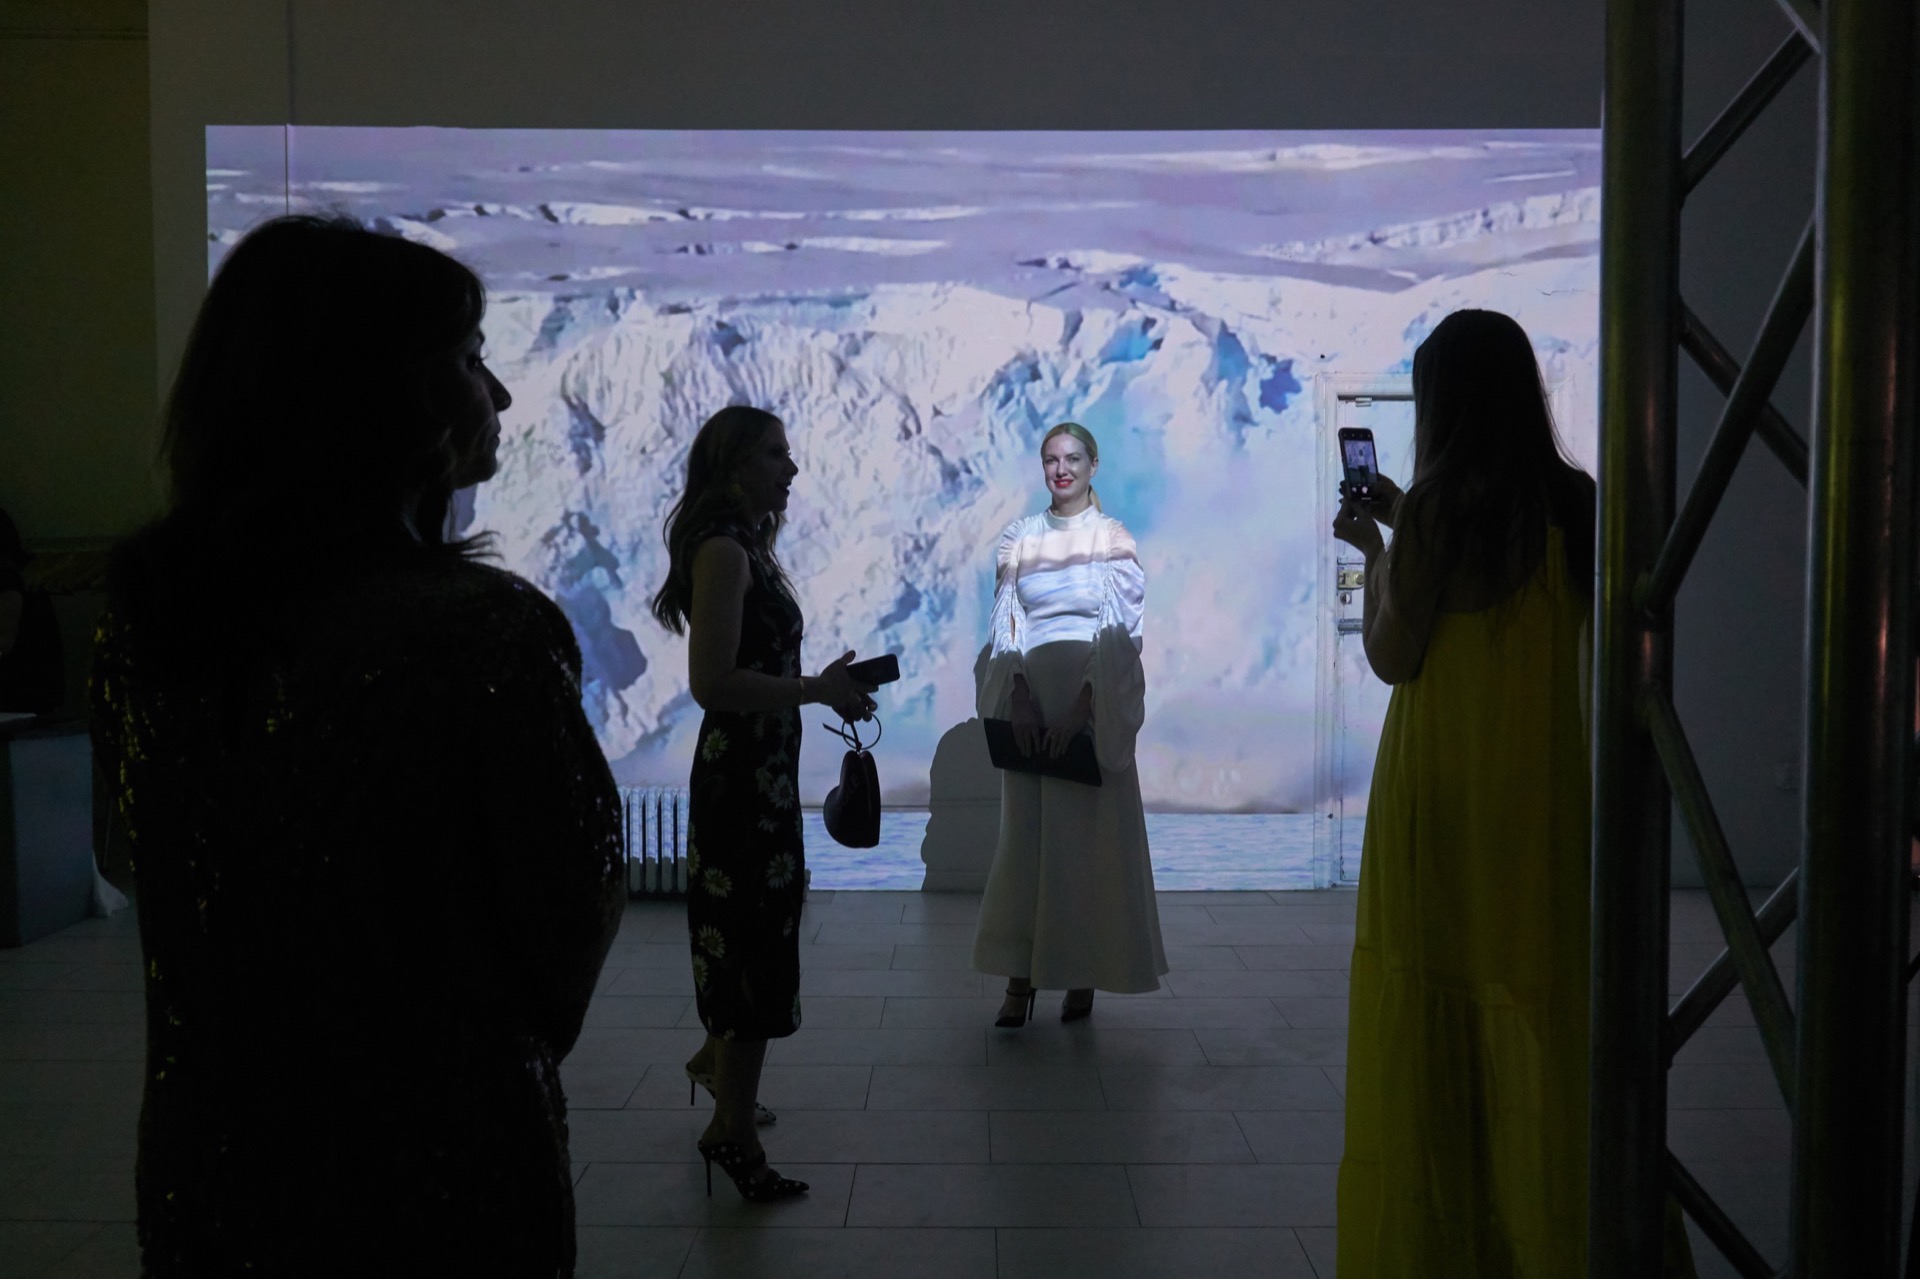 Photograph of four people in a dark gallery space. Only one is illuminated, who appears to be a blond-haired woman, very nicely done-up, and who is having her picture taken by someone else in the frame. She is illuminated by a projection of a glacier collapsing behind her. She is smiling.